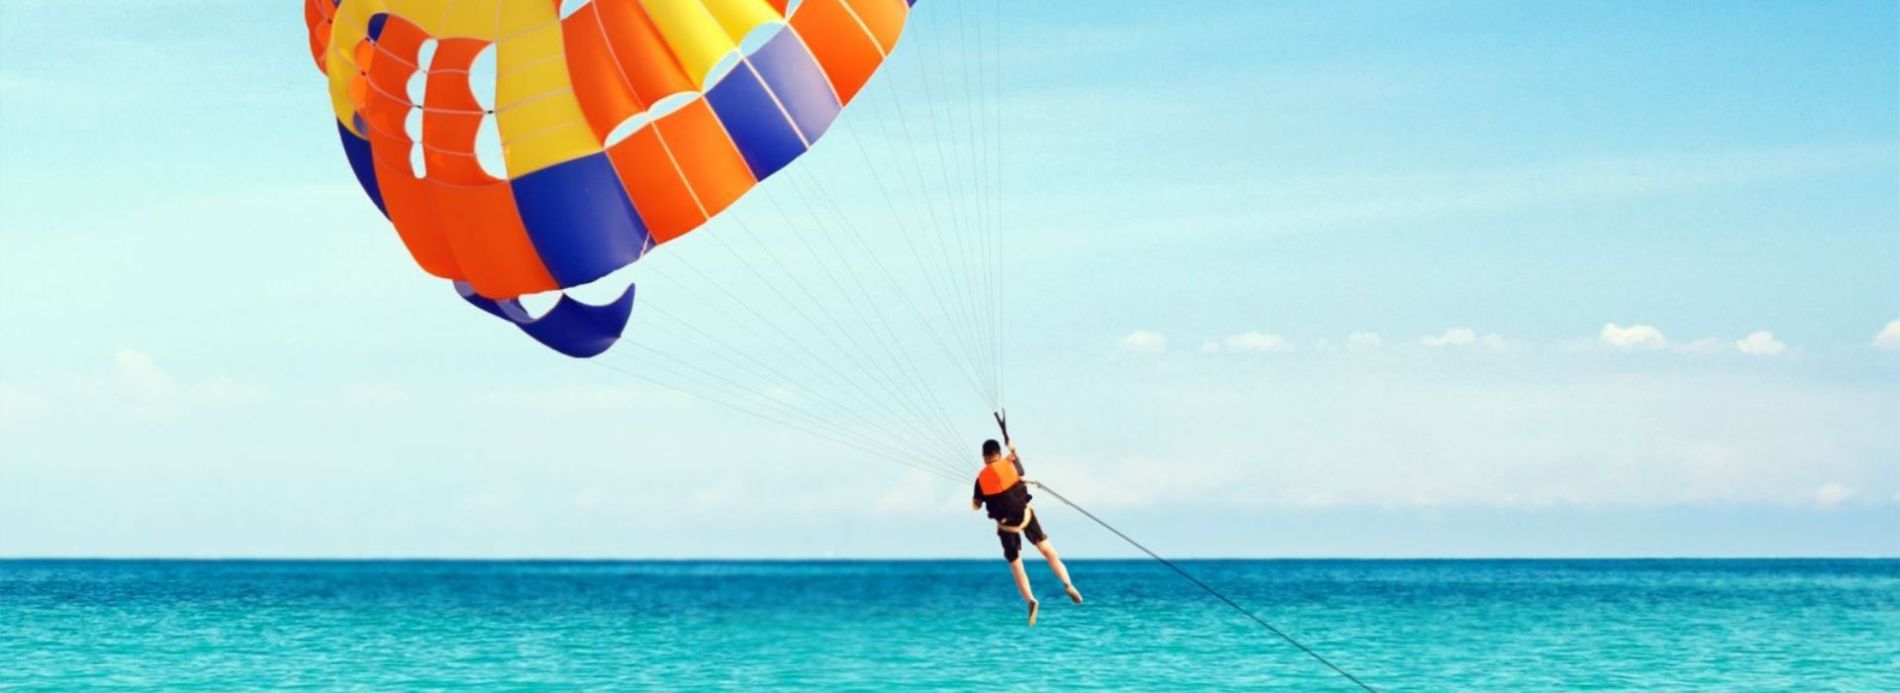 Man parasailing in the waters of Anna Maria Island